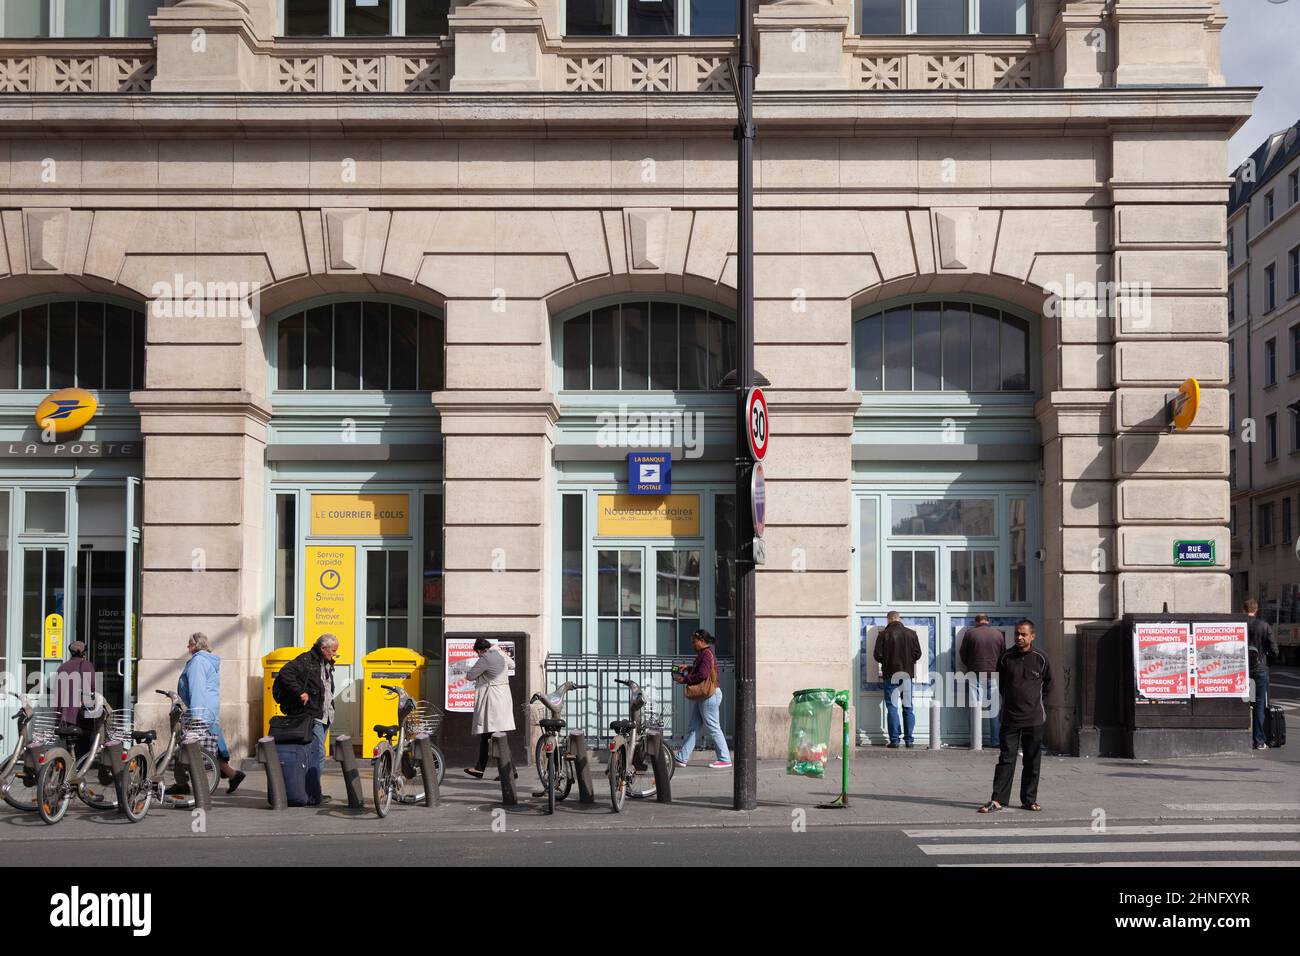 La Poste, the Post office associated with the Gare du Nord station in central Paris, France. Customers and pedestrians are on the pavement outside. A Stock Photo